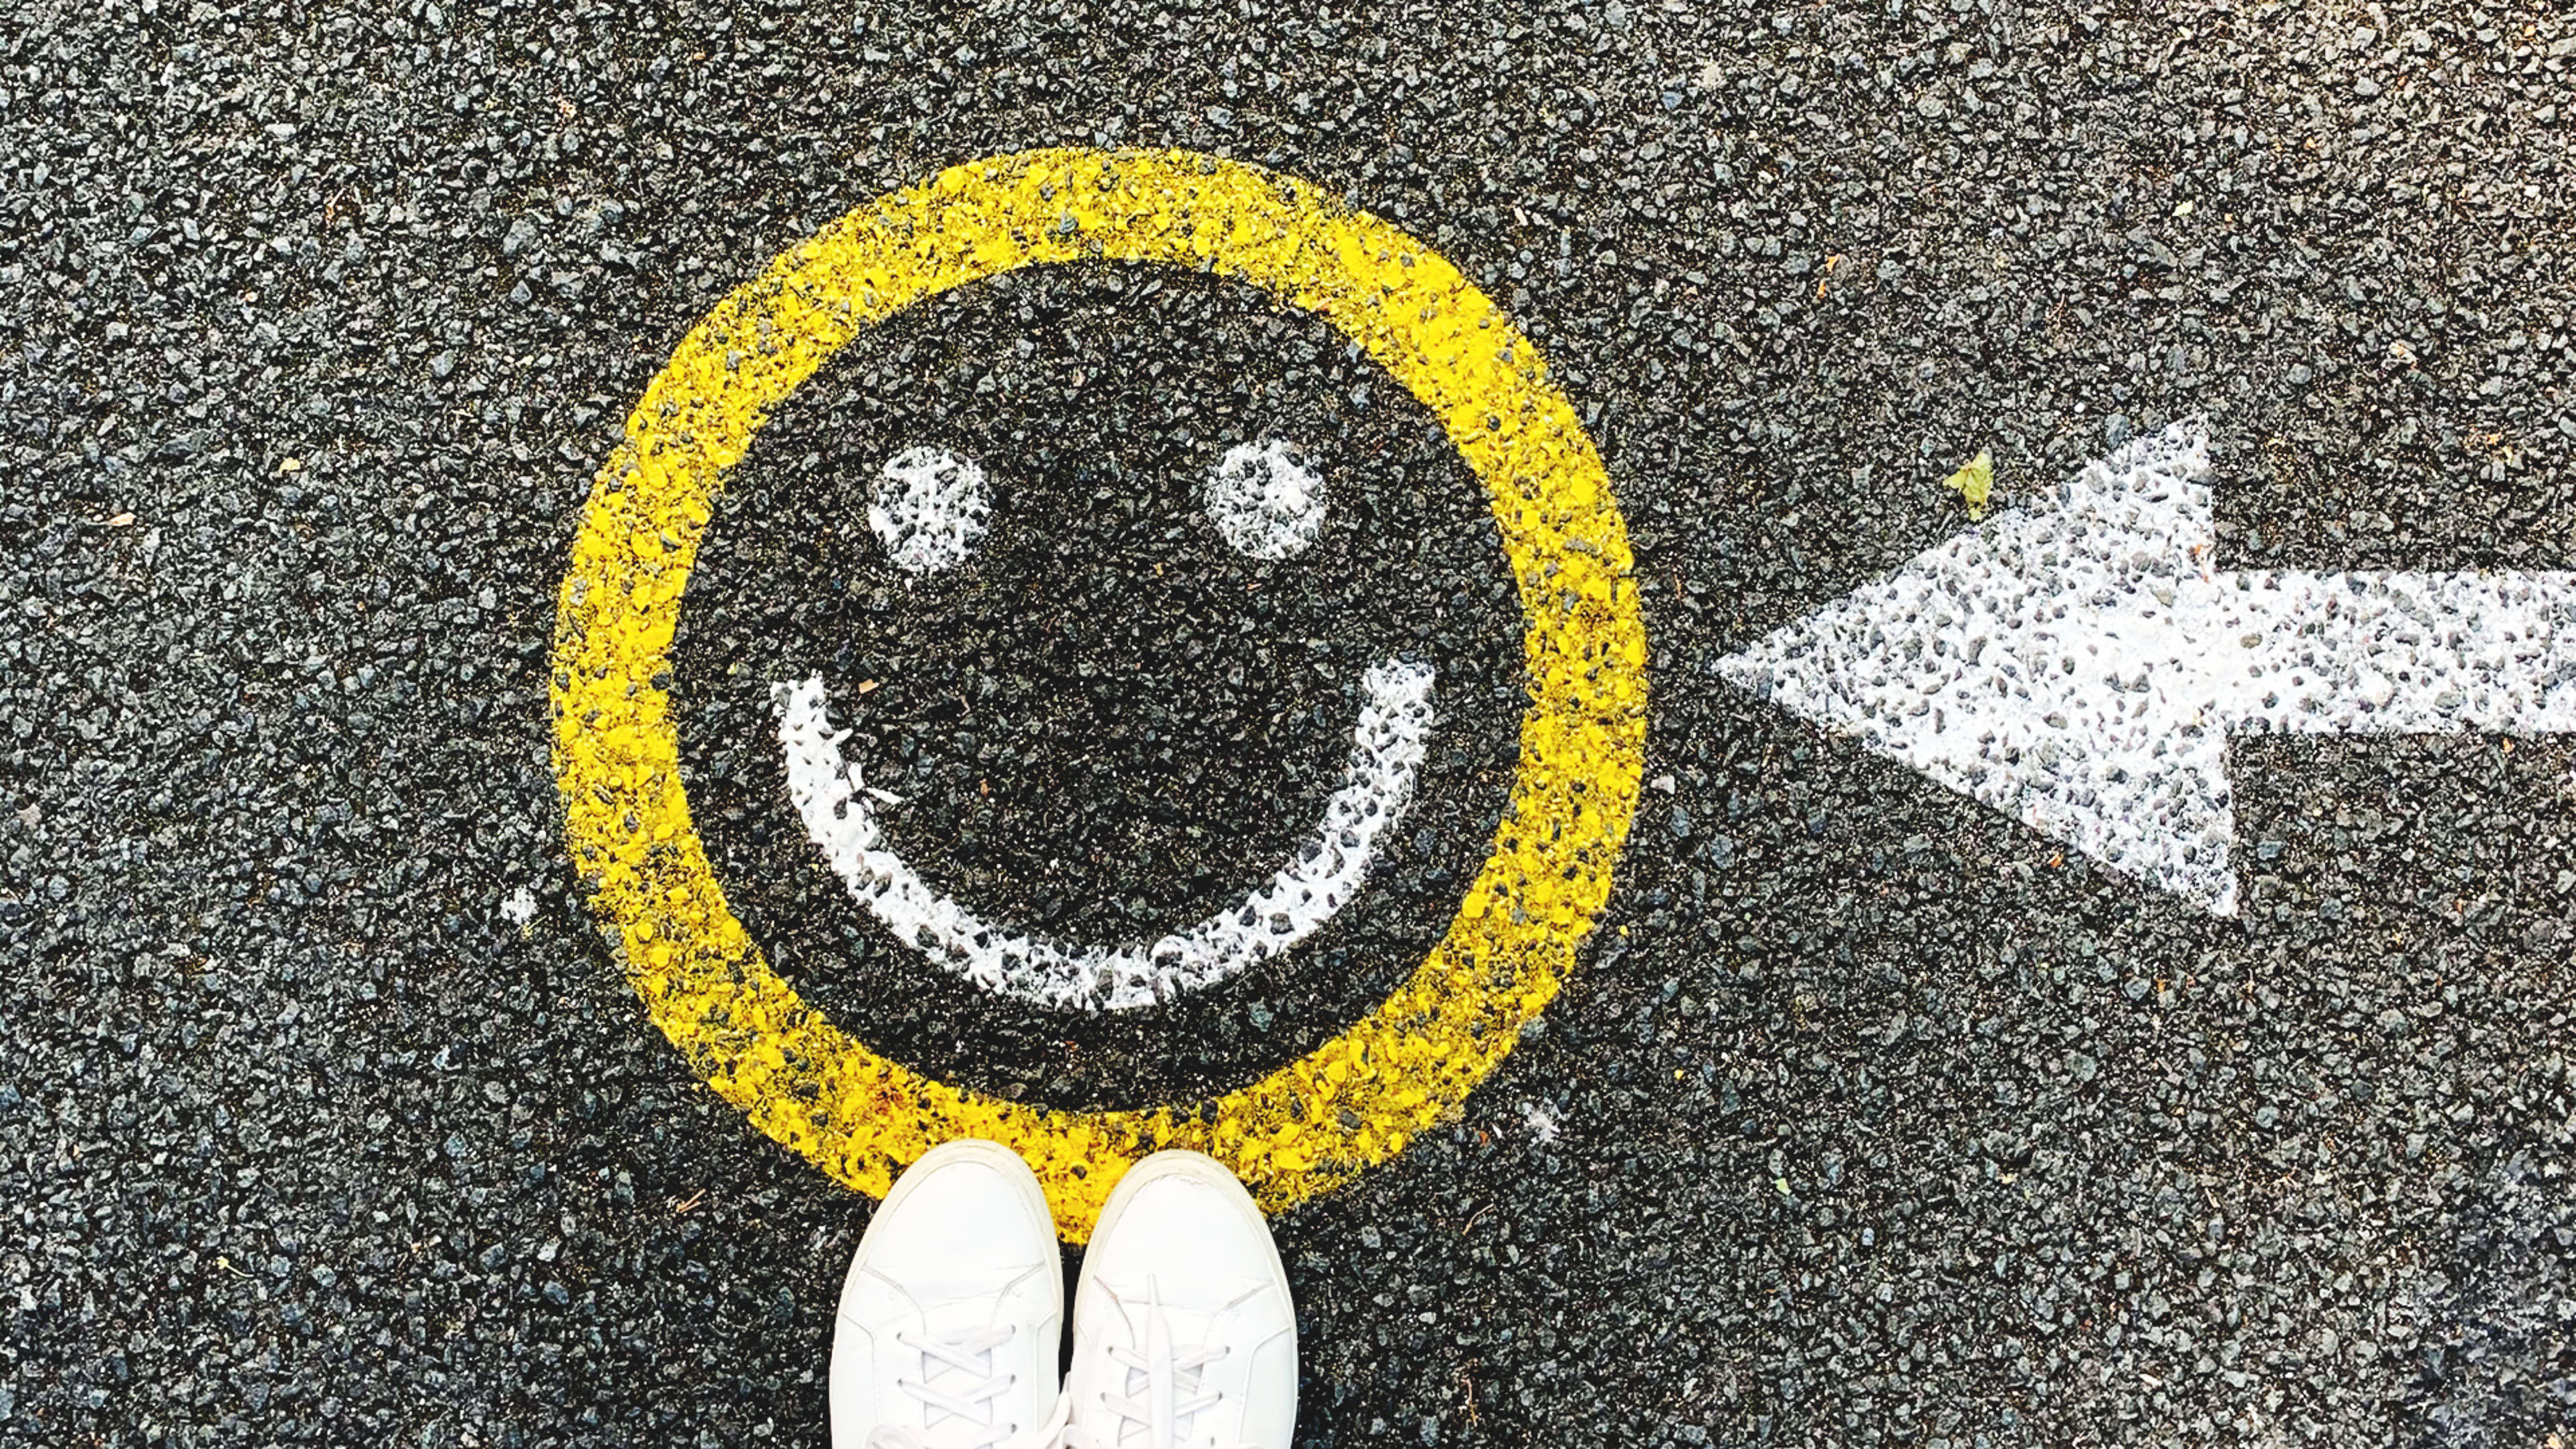 How to stay positive when you really don’t feel like it